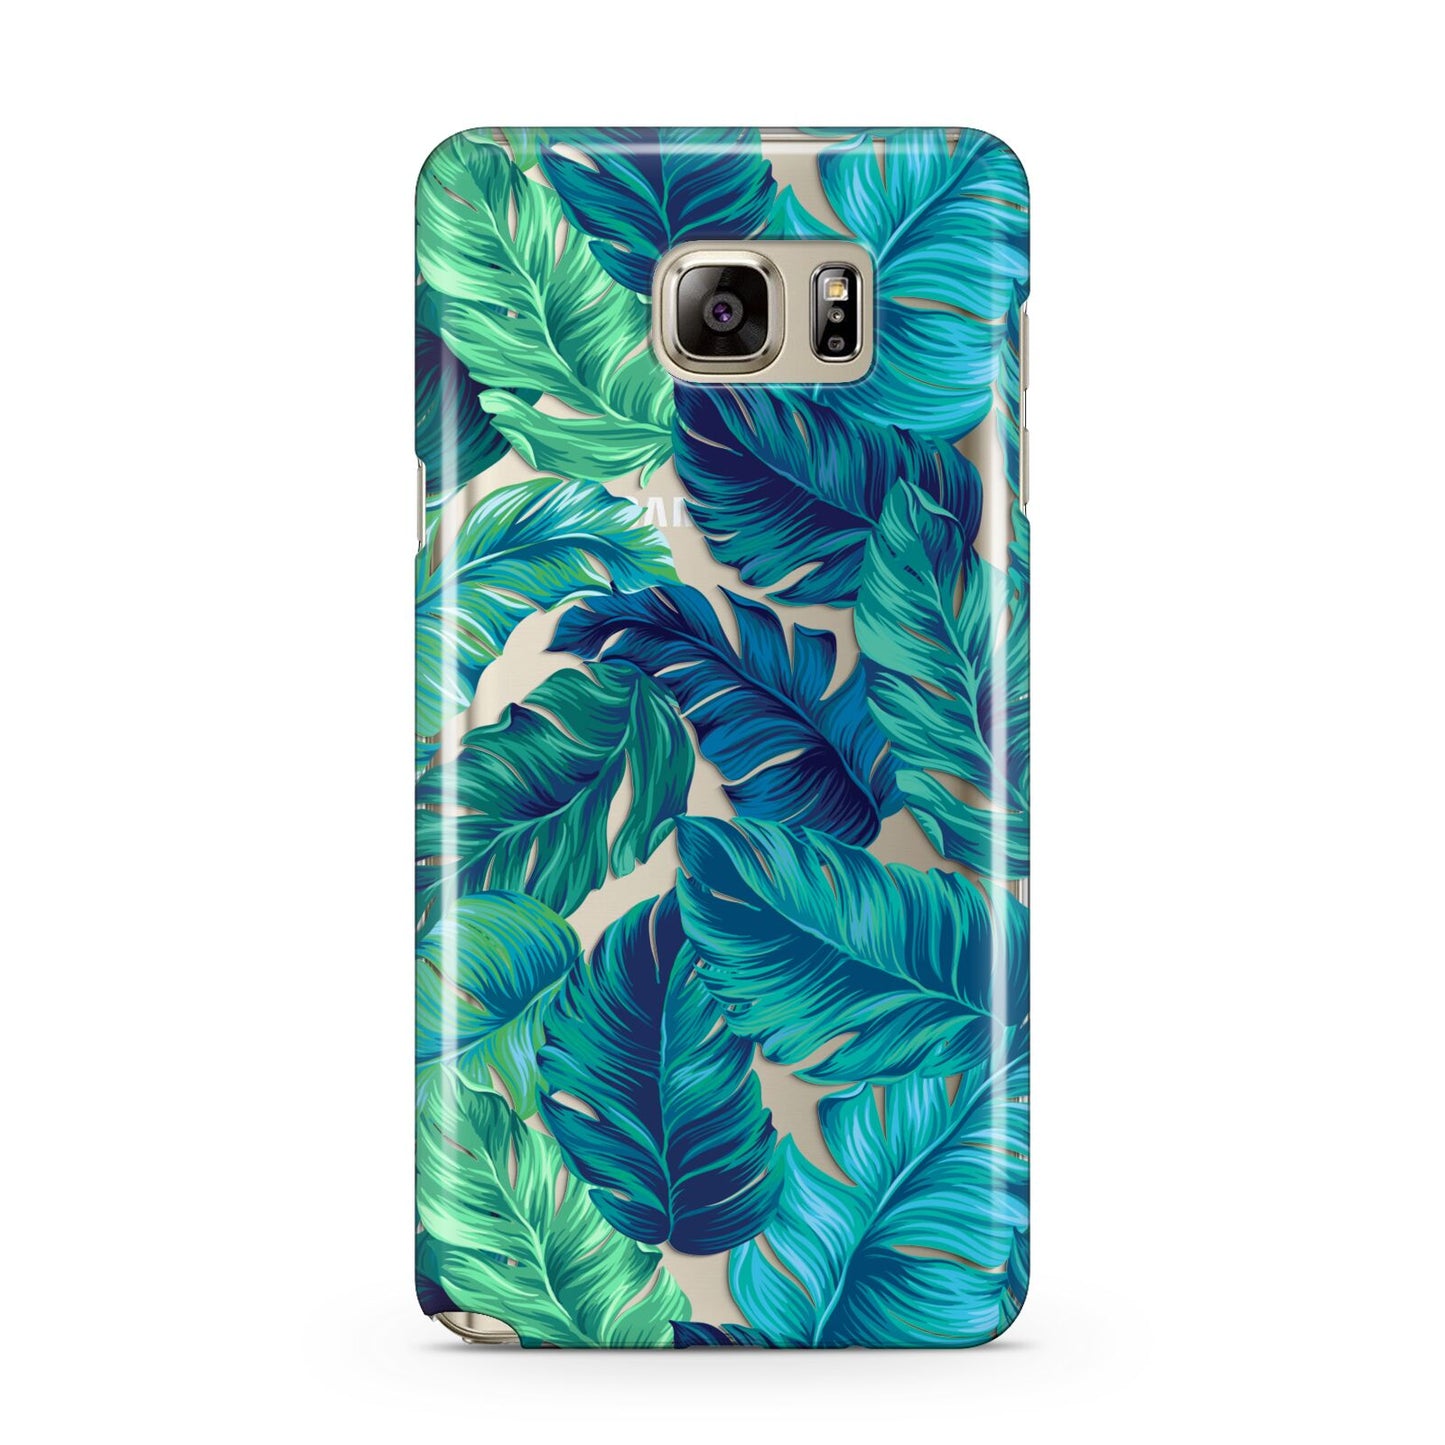 Tropical Leaves Samsung Galaxy Note 5 Case